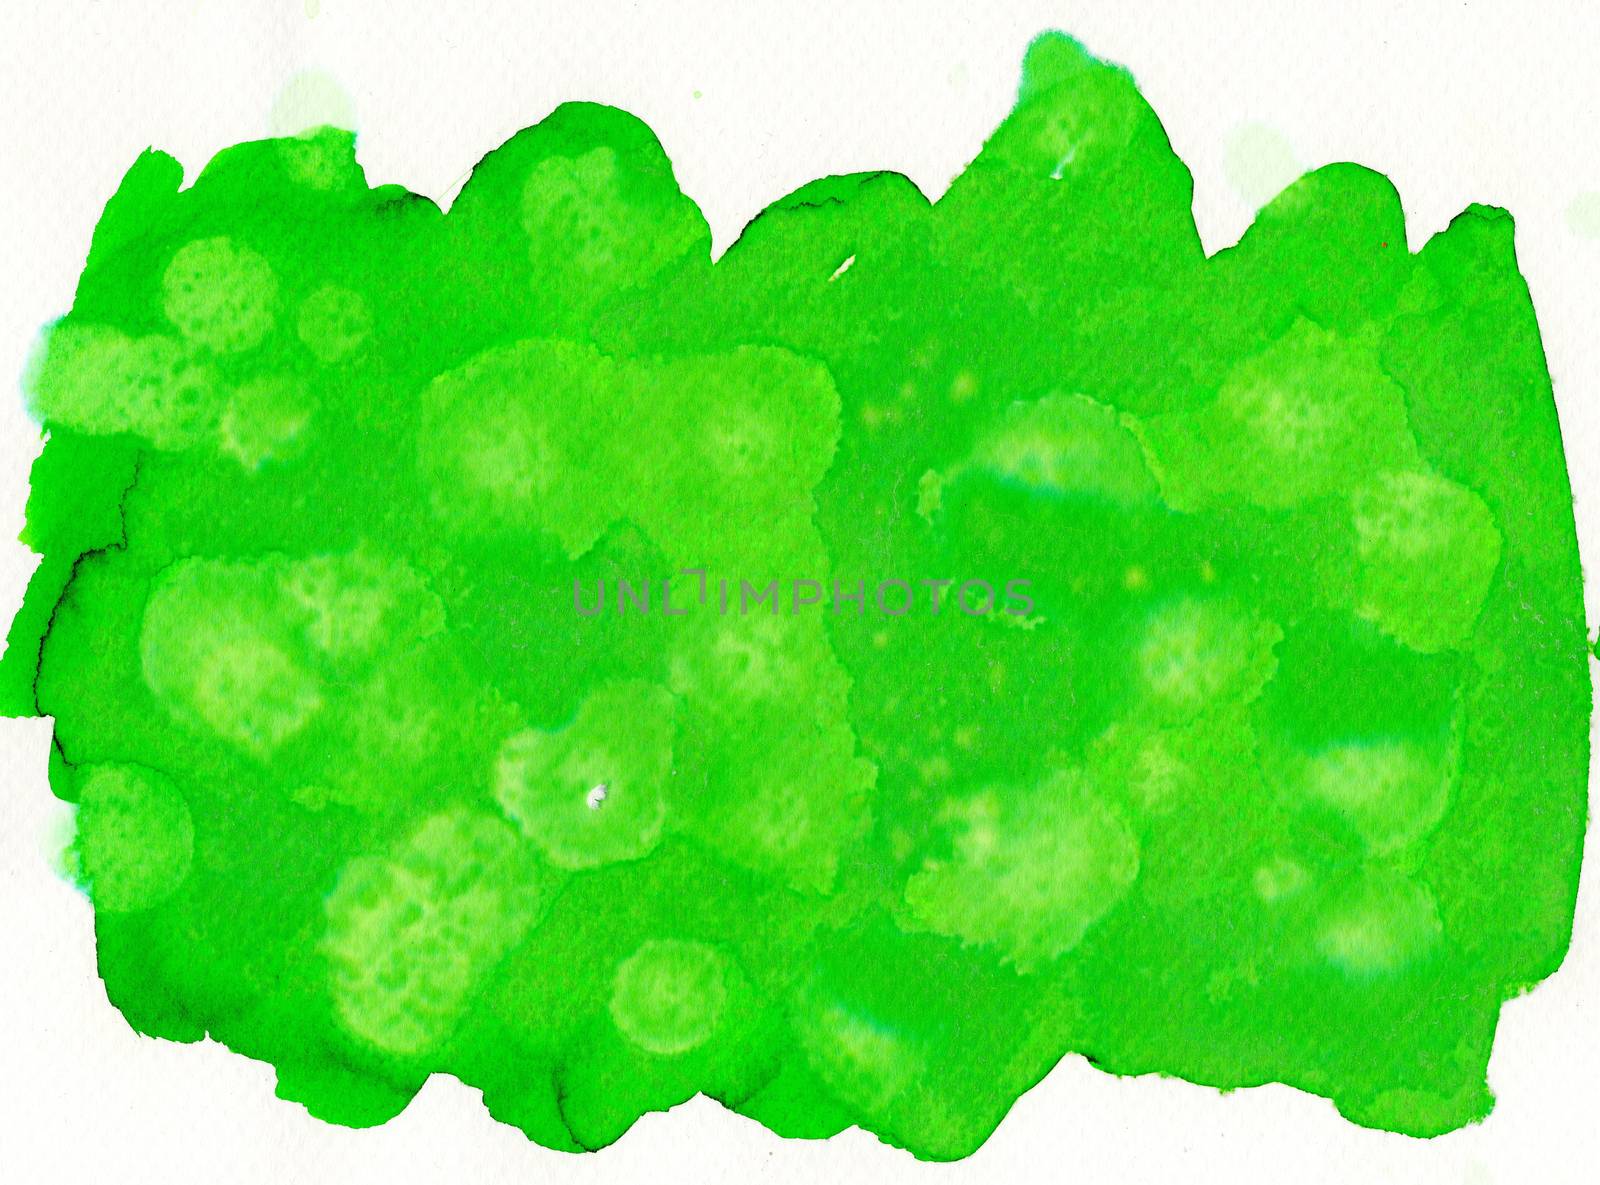 Abstract background of watercolor on paper texture, hand painted in green